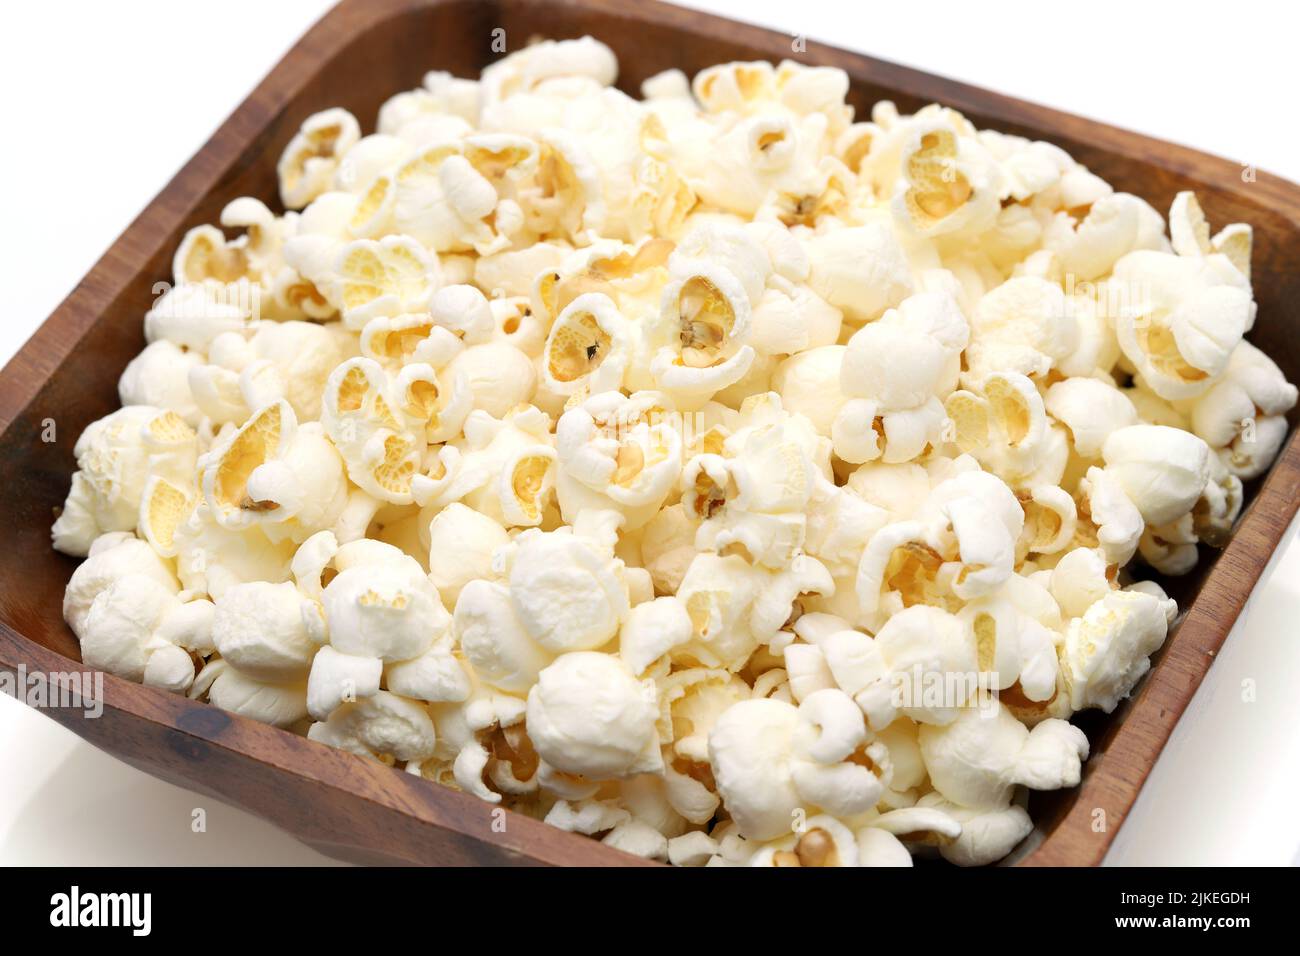 Popcorn in wooden bowl on white background, Side view, Close up Stock Photo